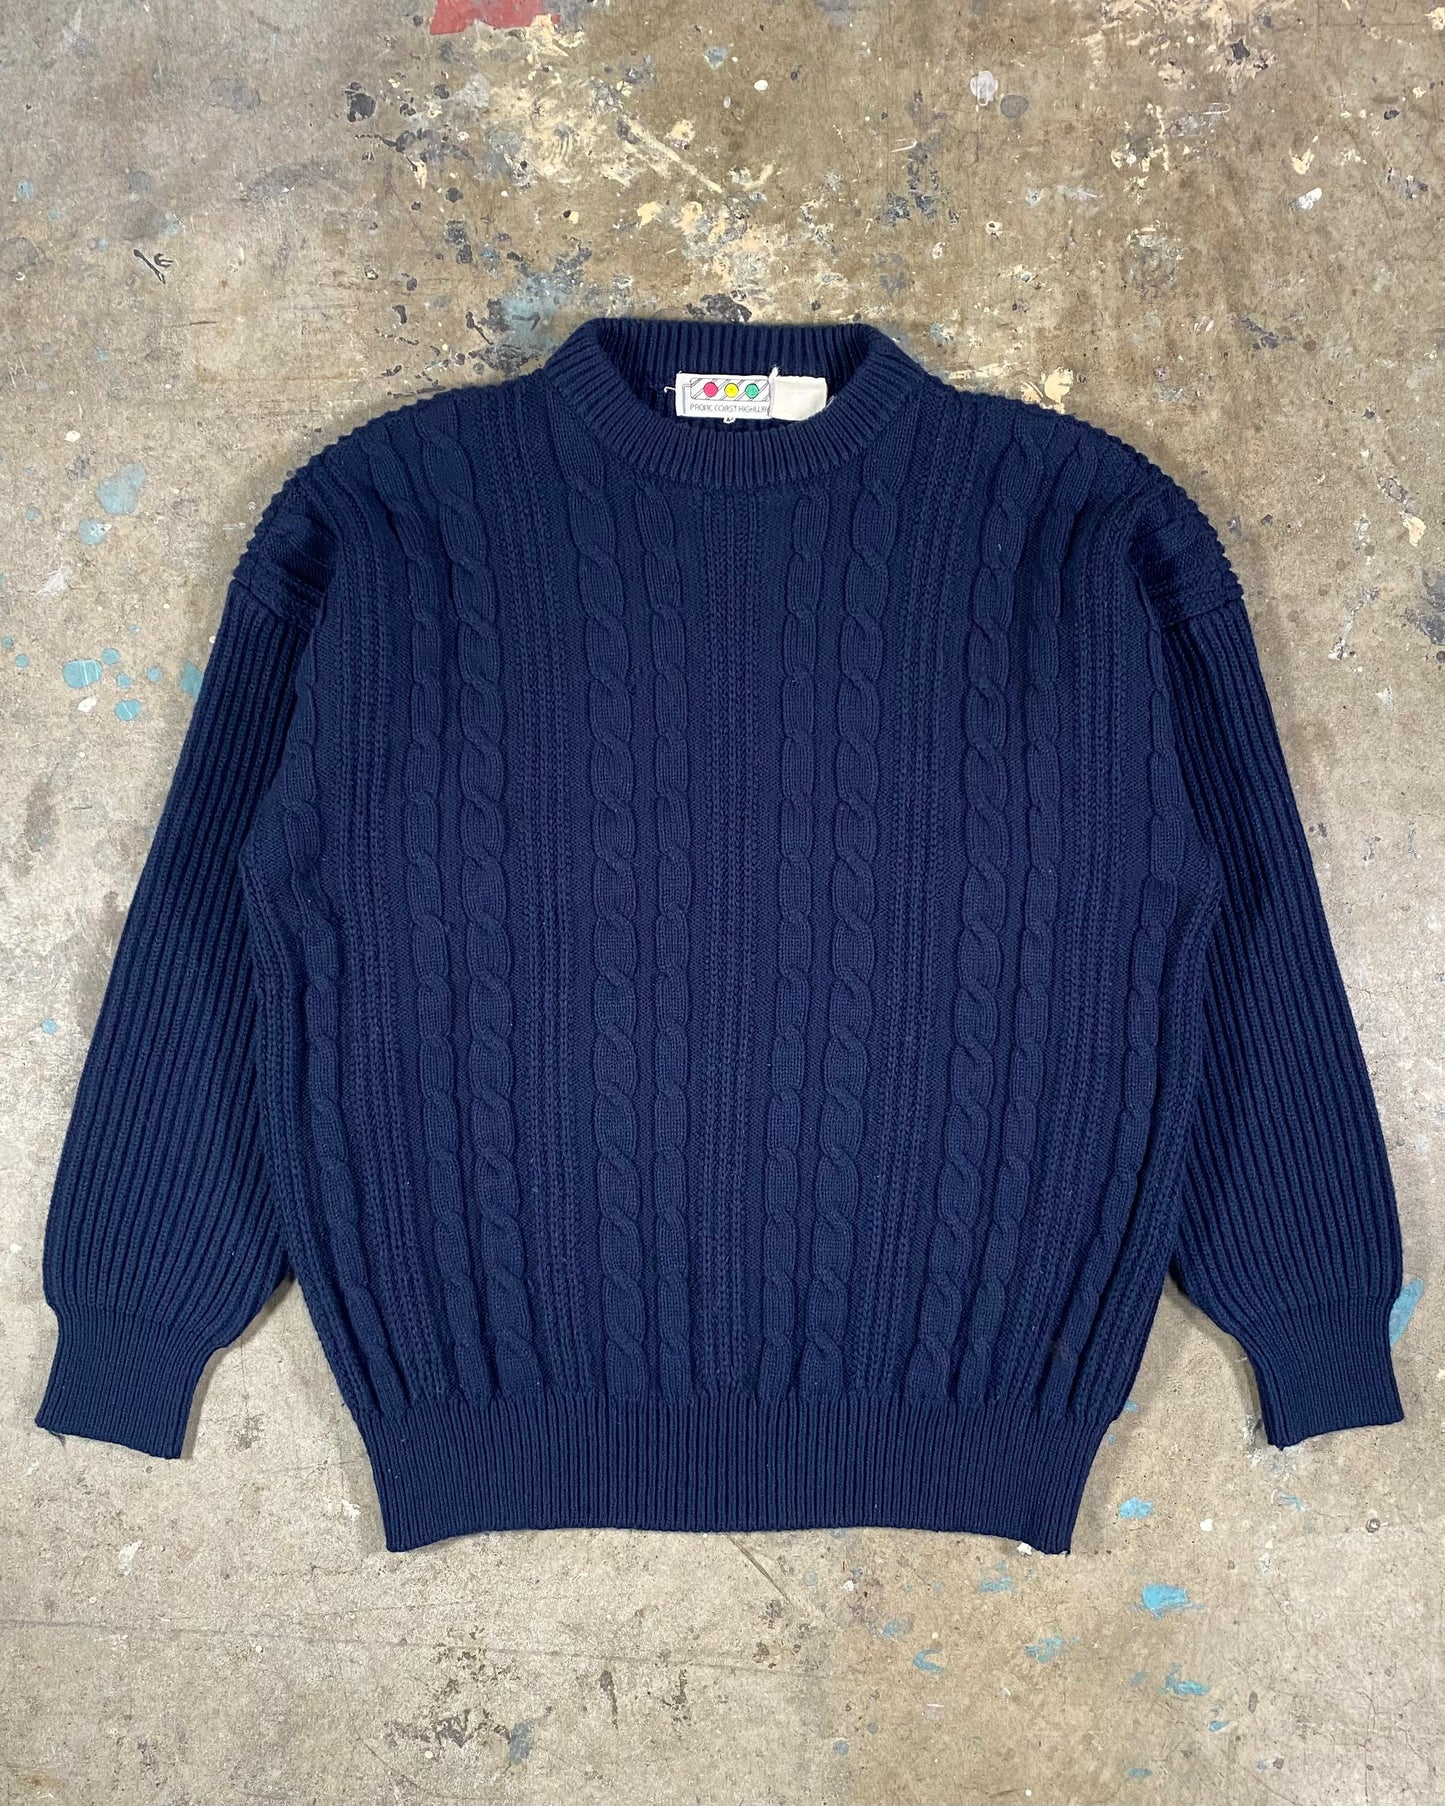 90s Cable Knit Sweater (M)